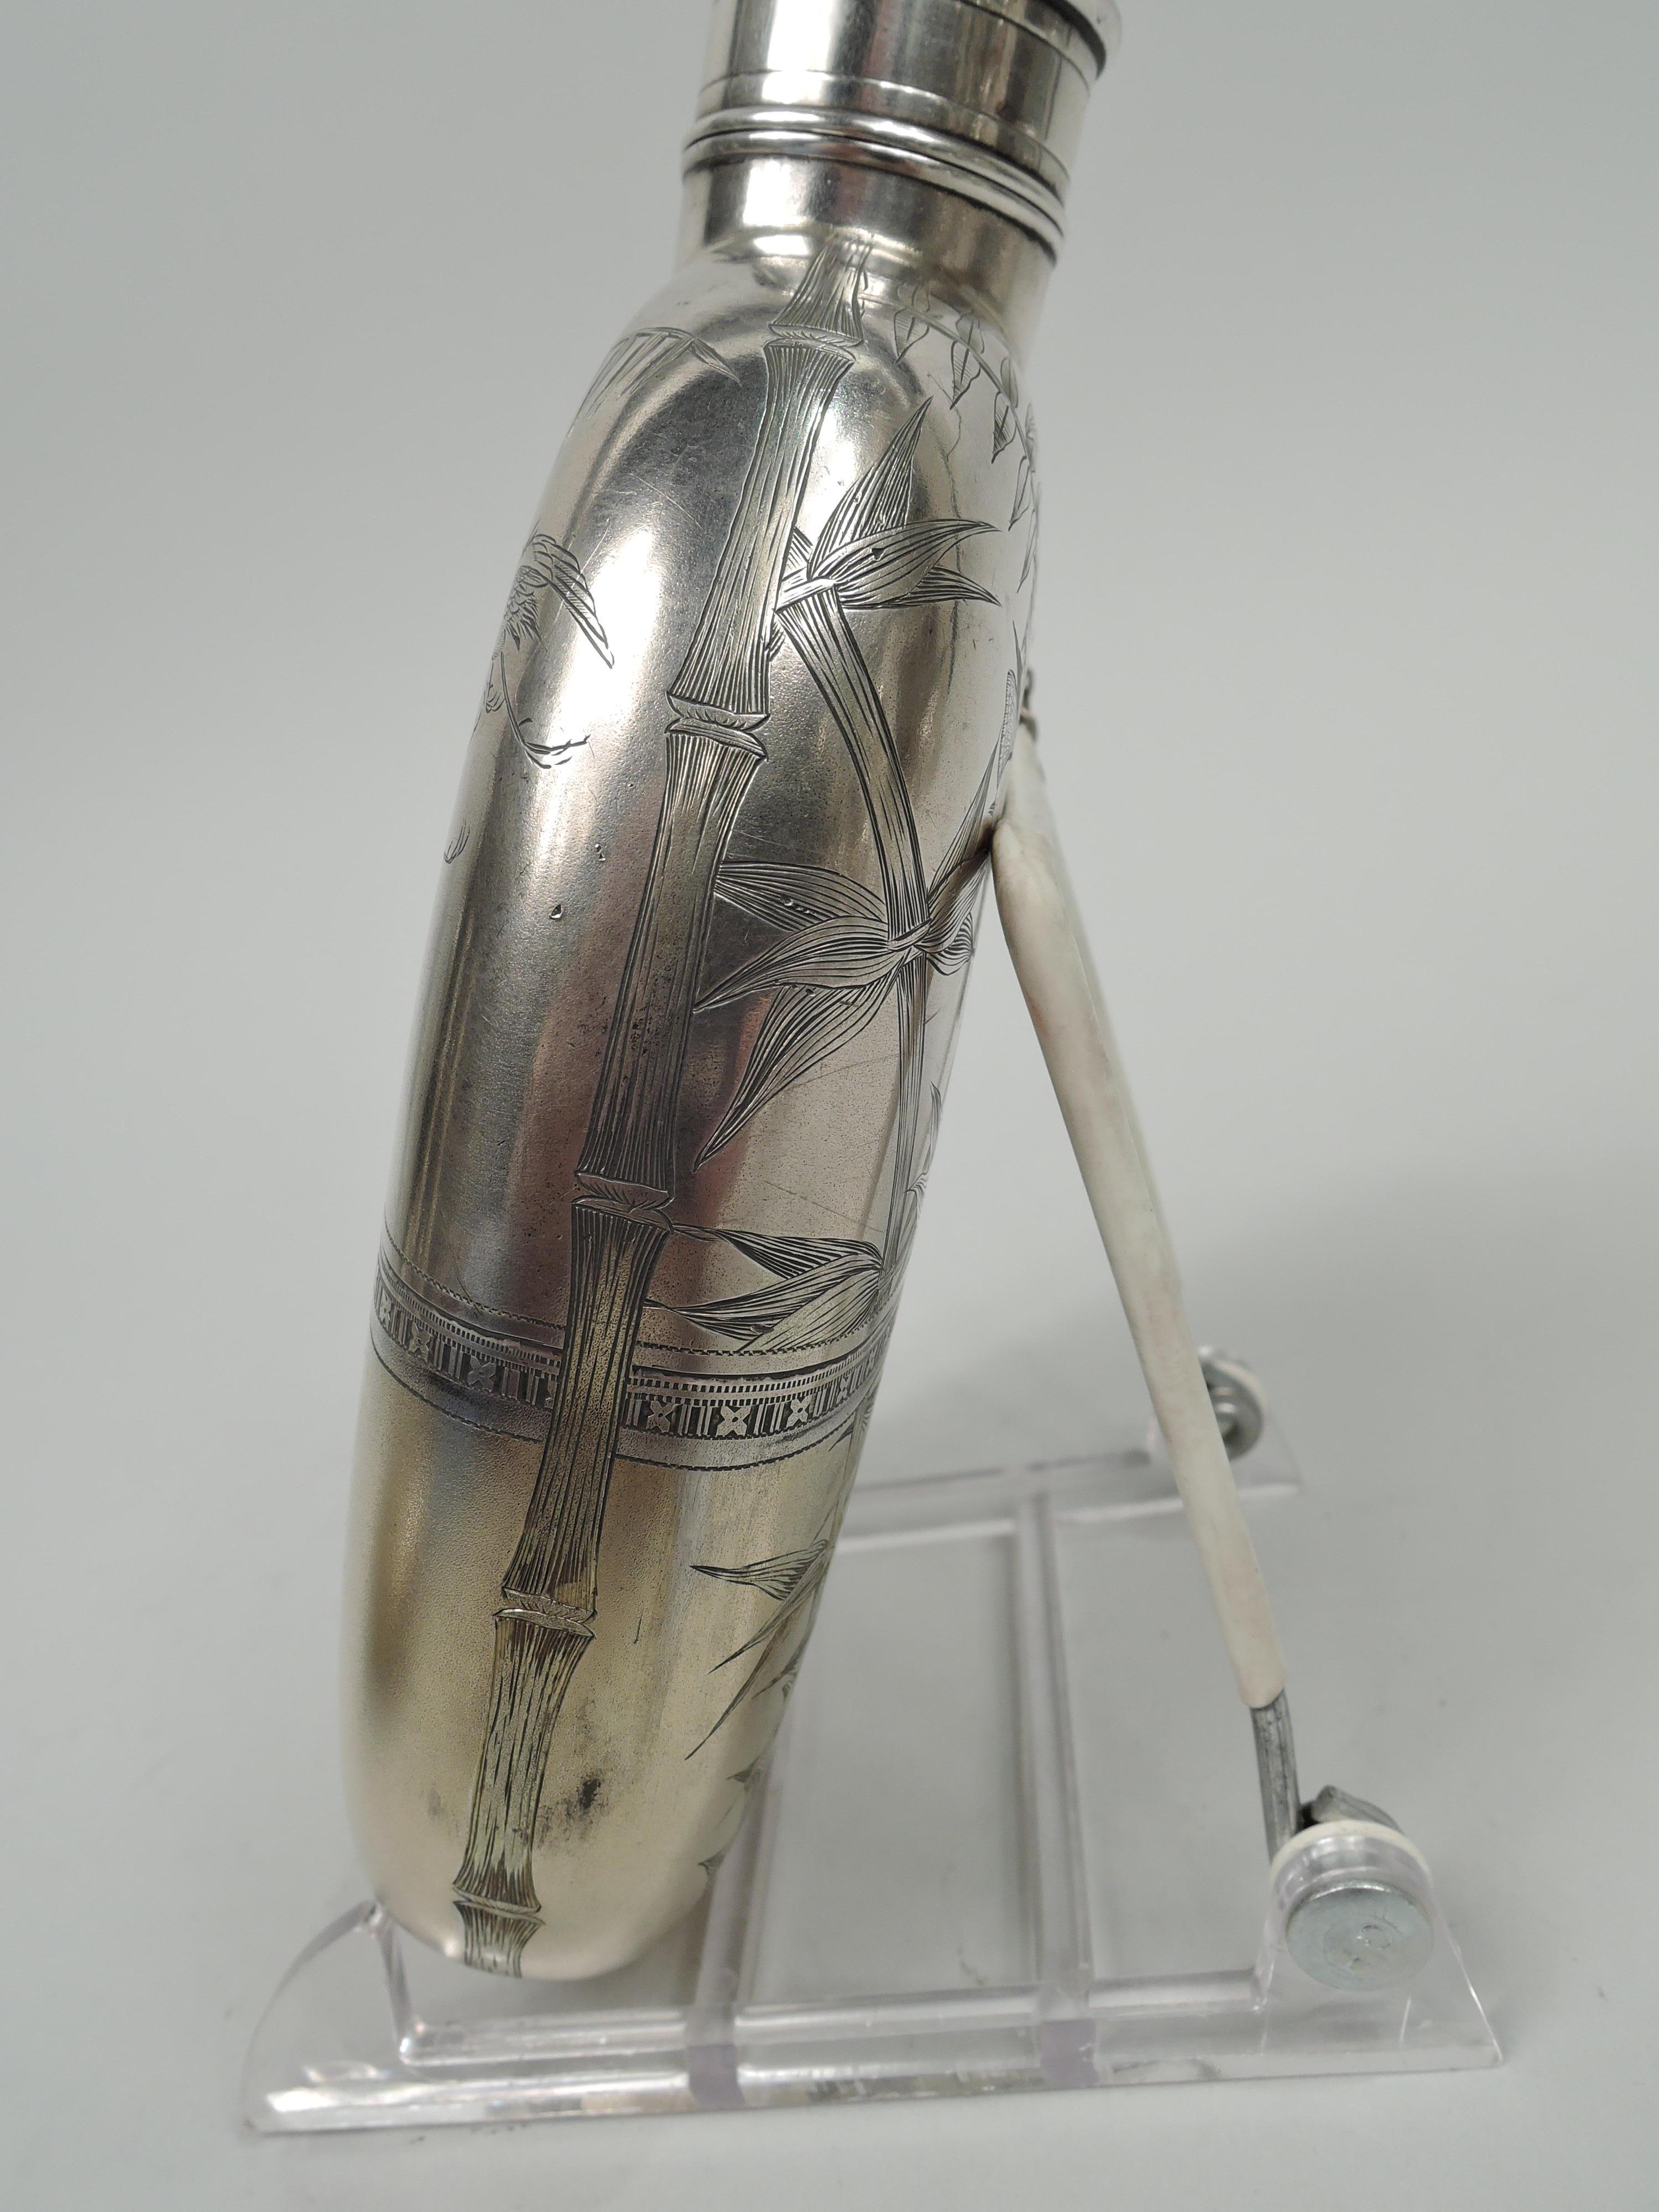 Japonesque sterling silver flask. Made by Gorham in Providence in 1878. Ovoid with flat front and back, short neck, and chained, threaded, and cork-lined cover. Engraved bamboo, cranes, butterflies, and pavilions. Bottom cup detachable to reveal